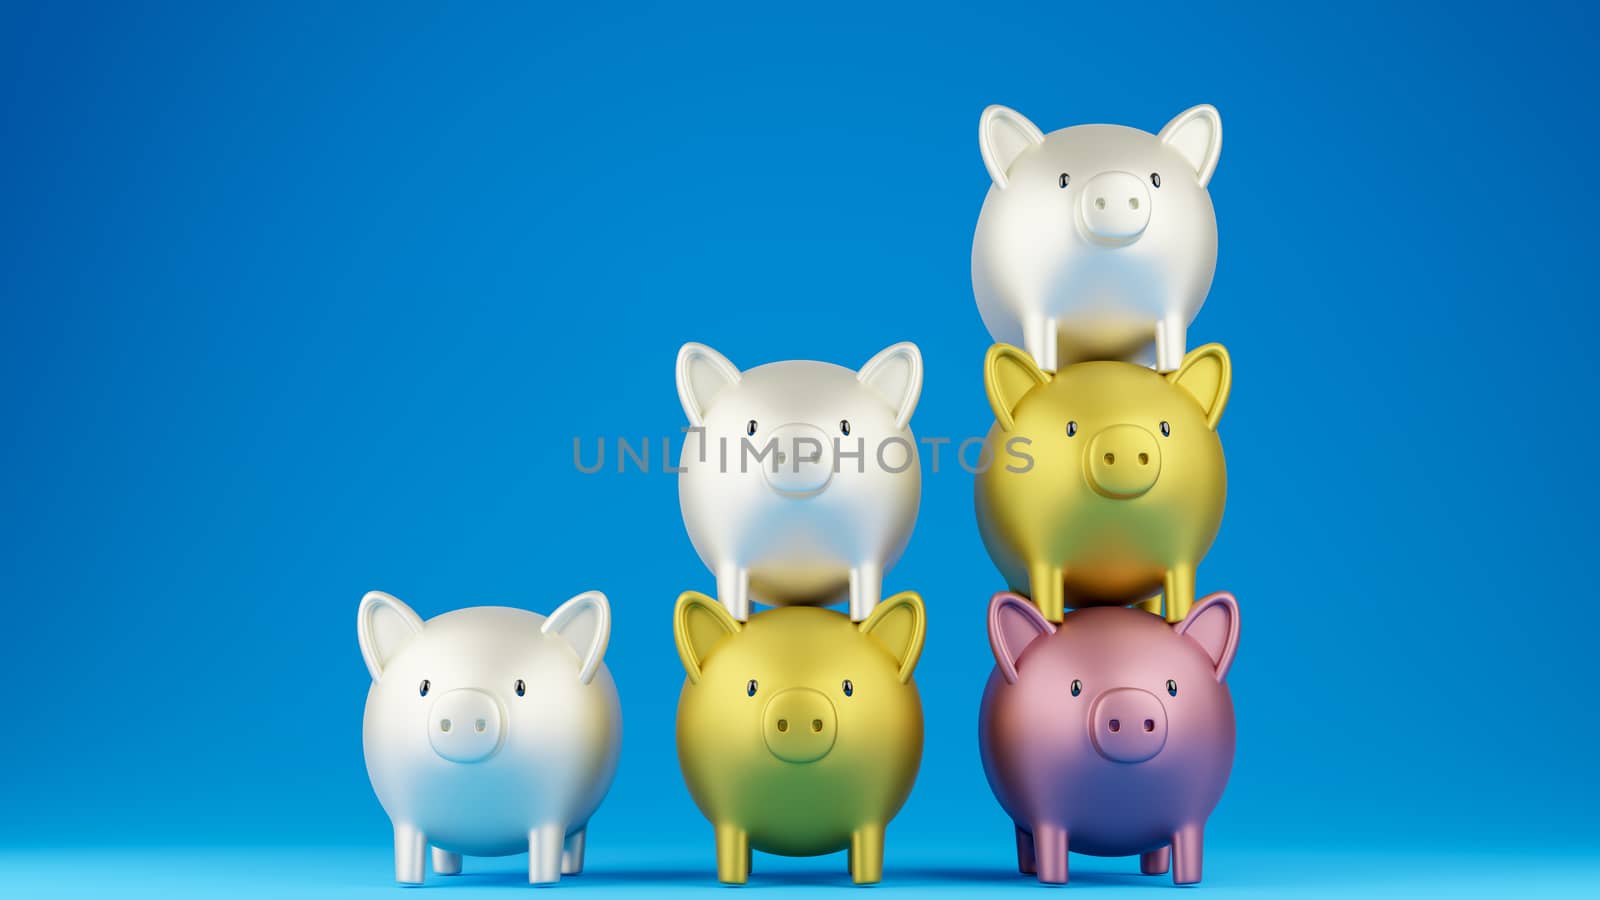 3 D rendered illustration of piggy banks in three different type of gold shaddings, white gold, metallic gold, and rose gold, in column design. Blue background. Business and finance concept.